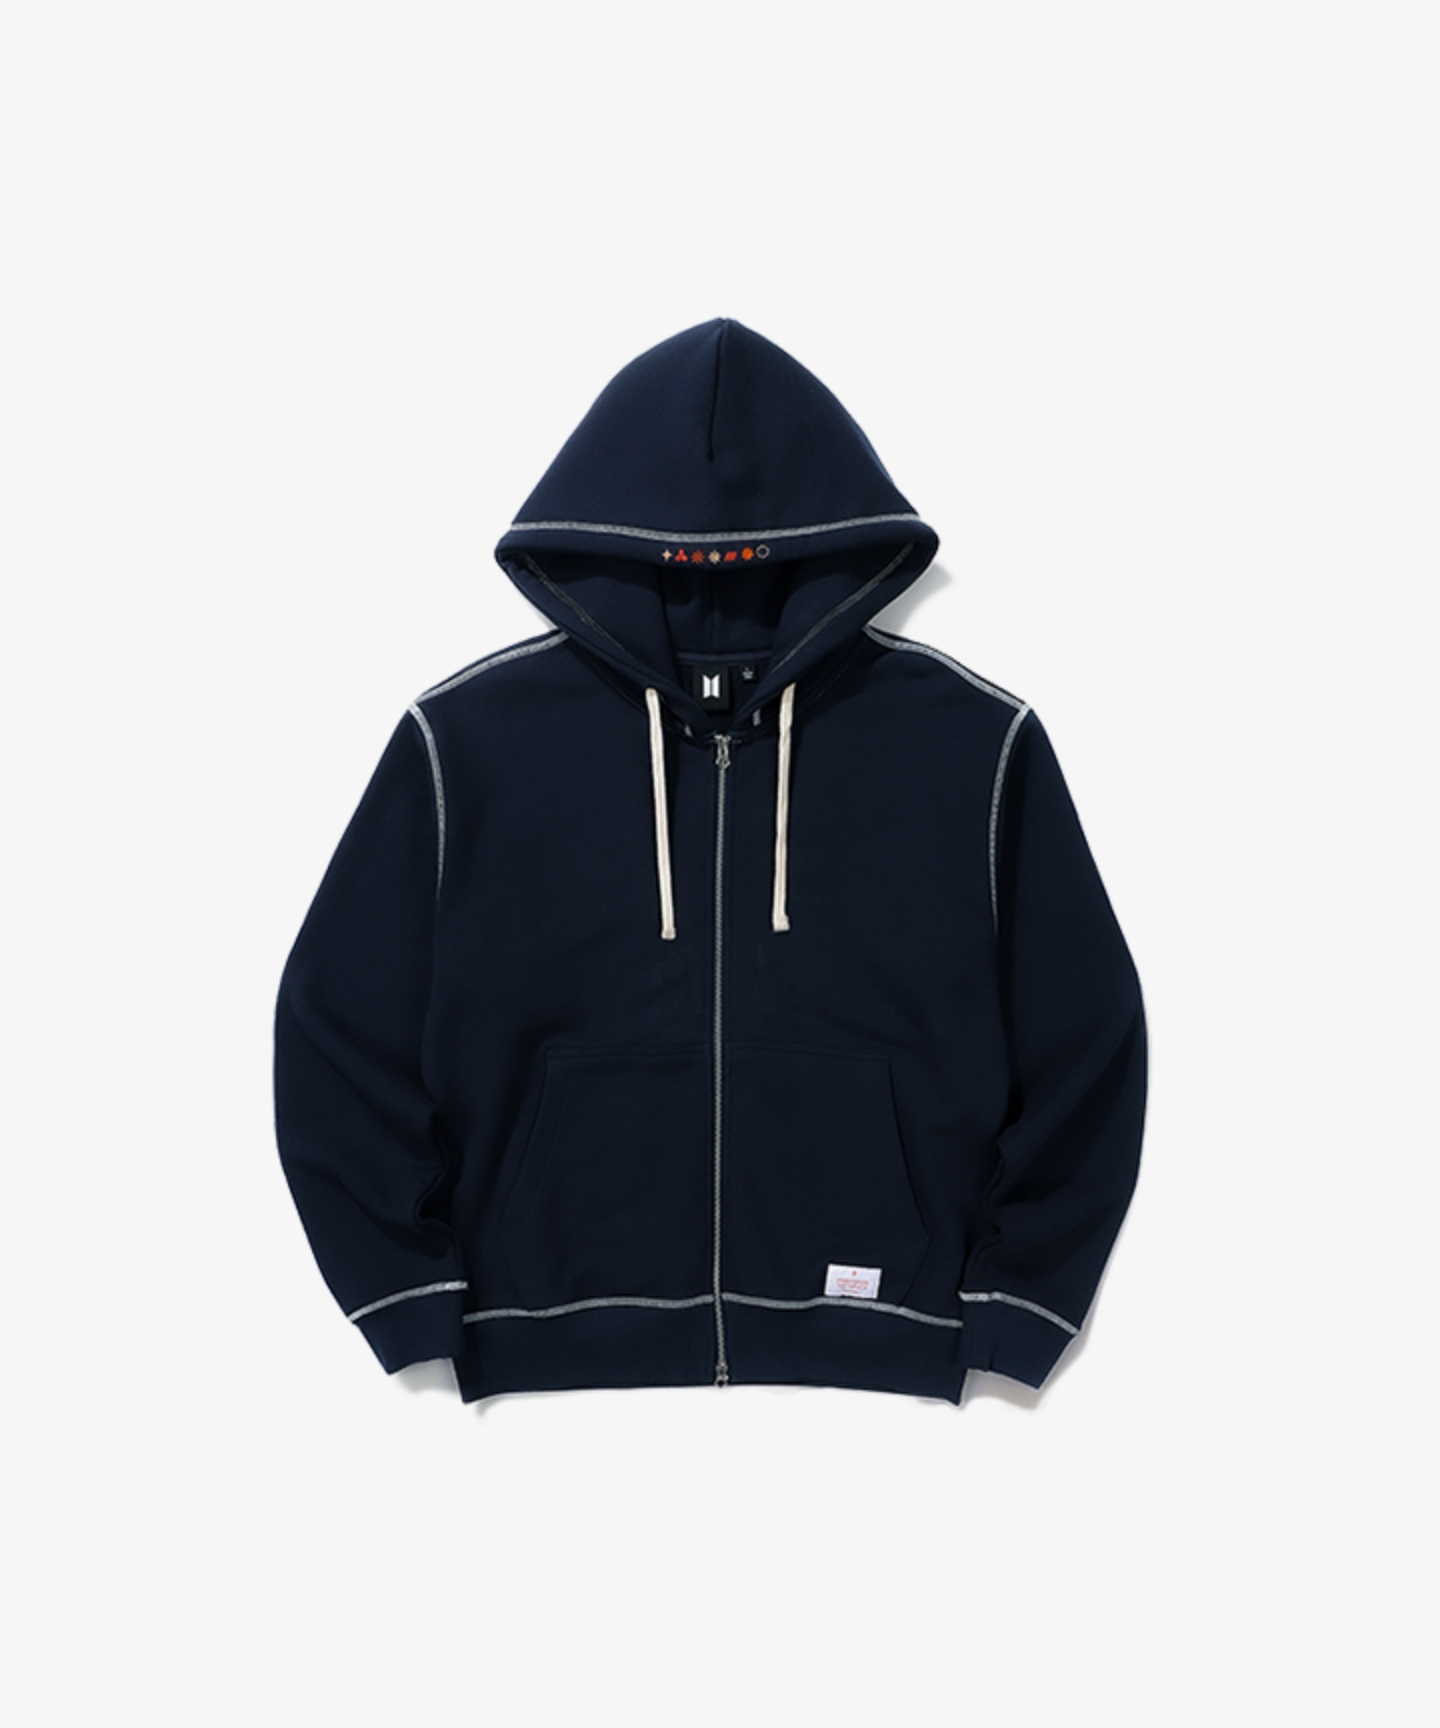 BTS Permission to Dance On Stage in Seoul Zip-Up Hoodie (navy)